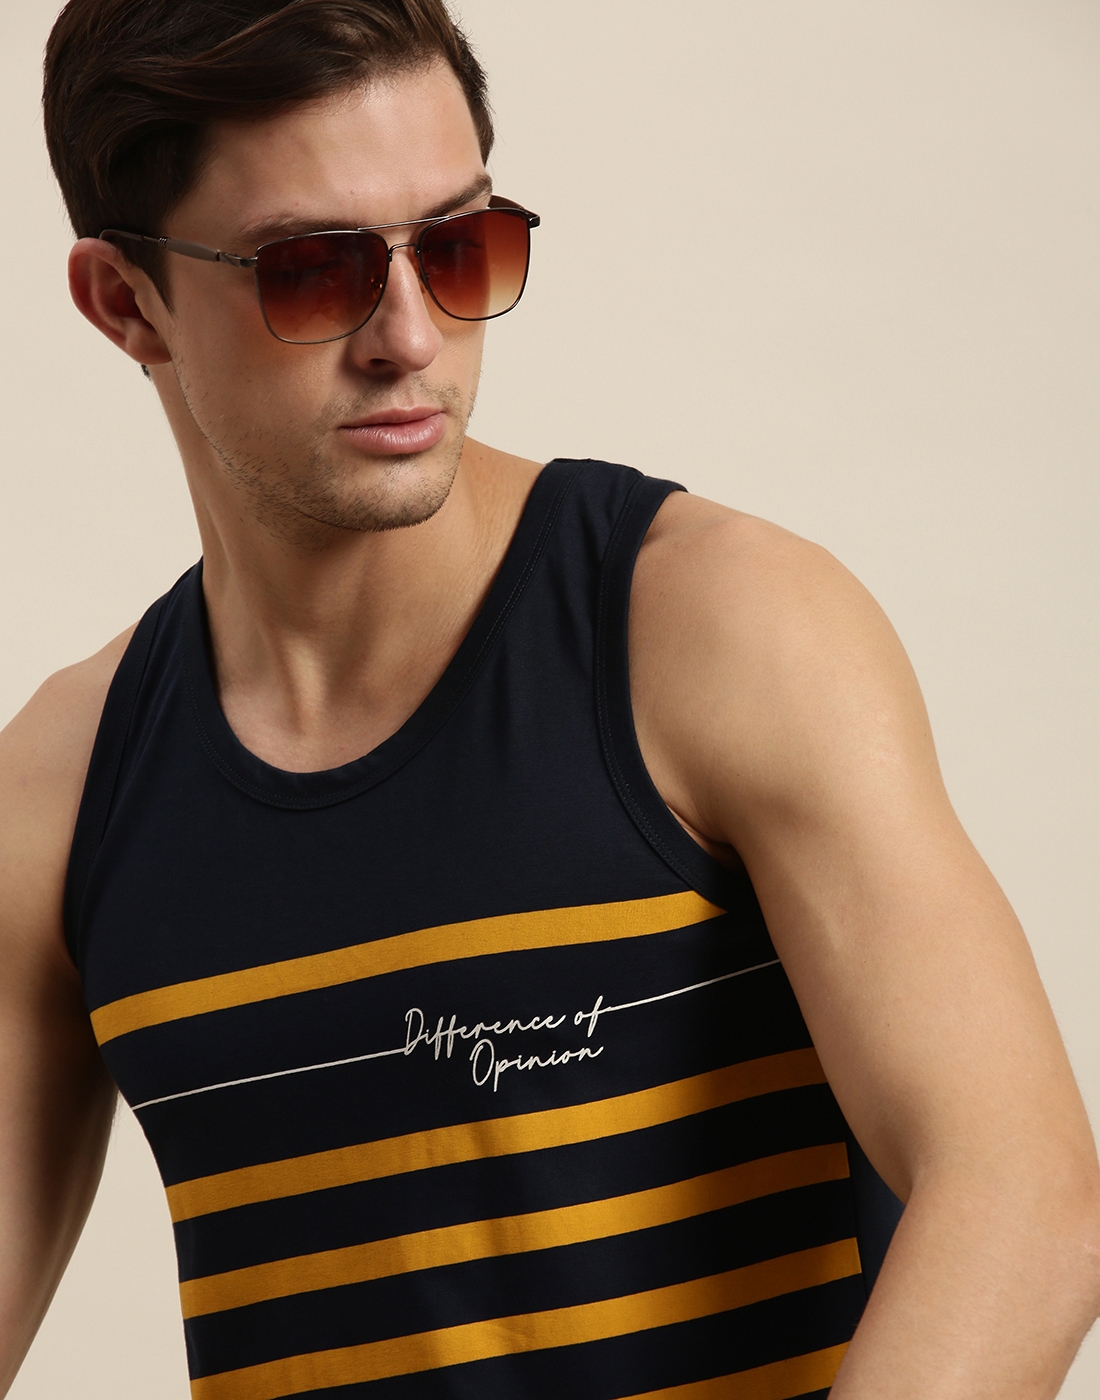 Difference of Opinion Navy Stripes Tank Top